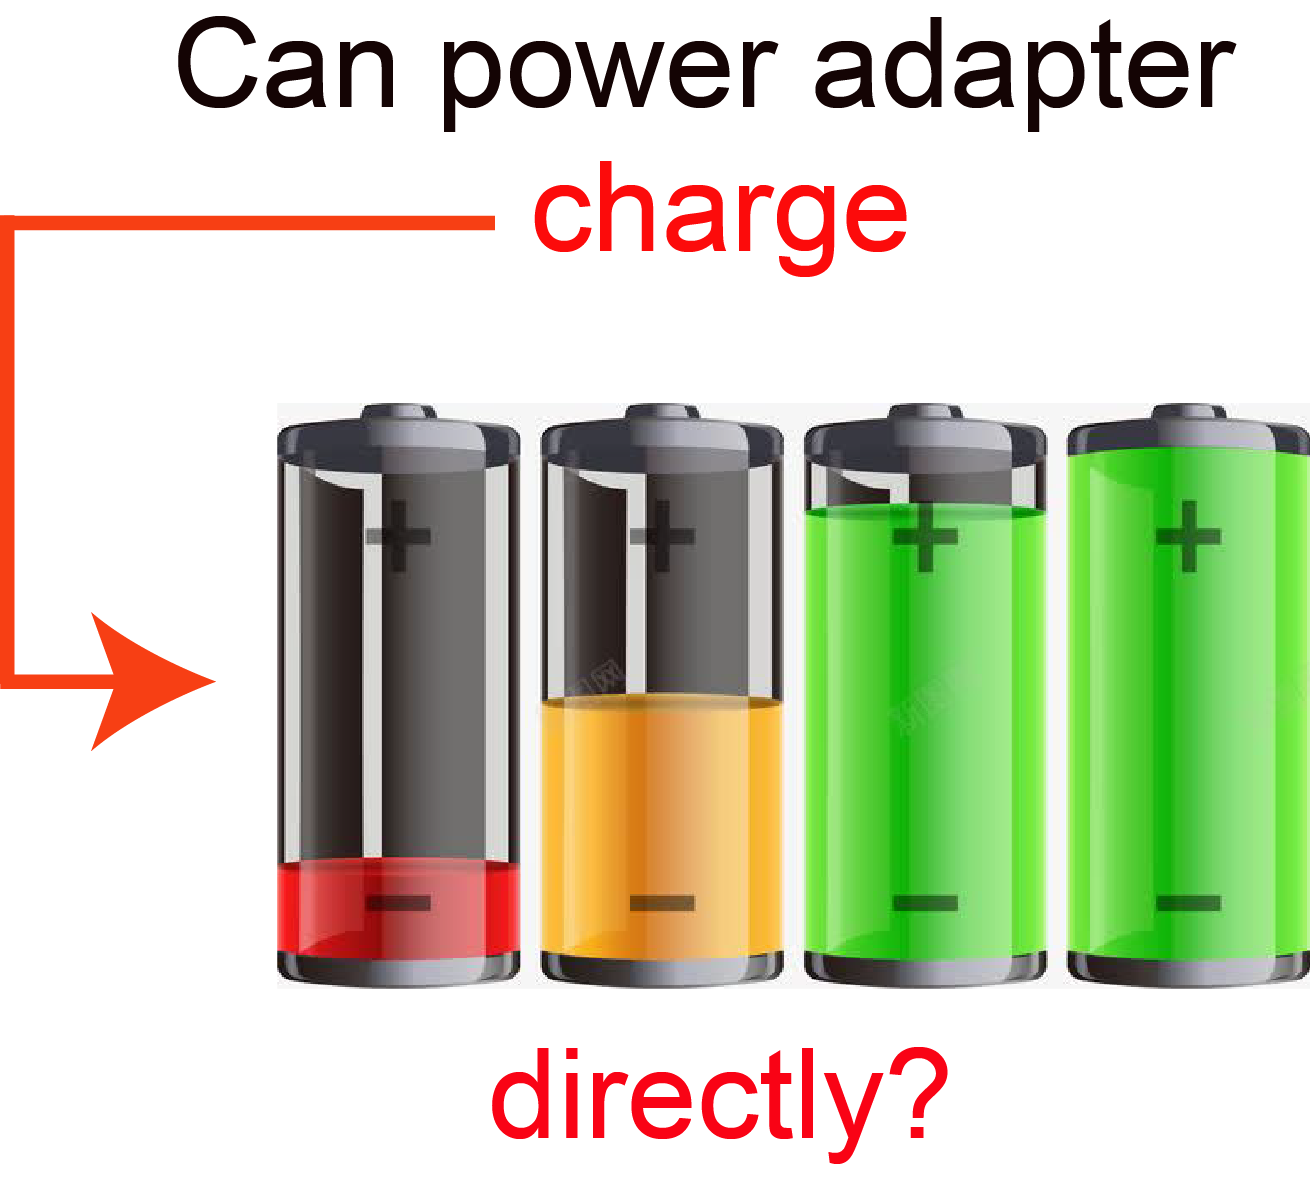 What is the different between power adapter and charger?